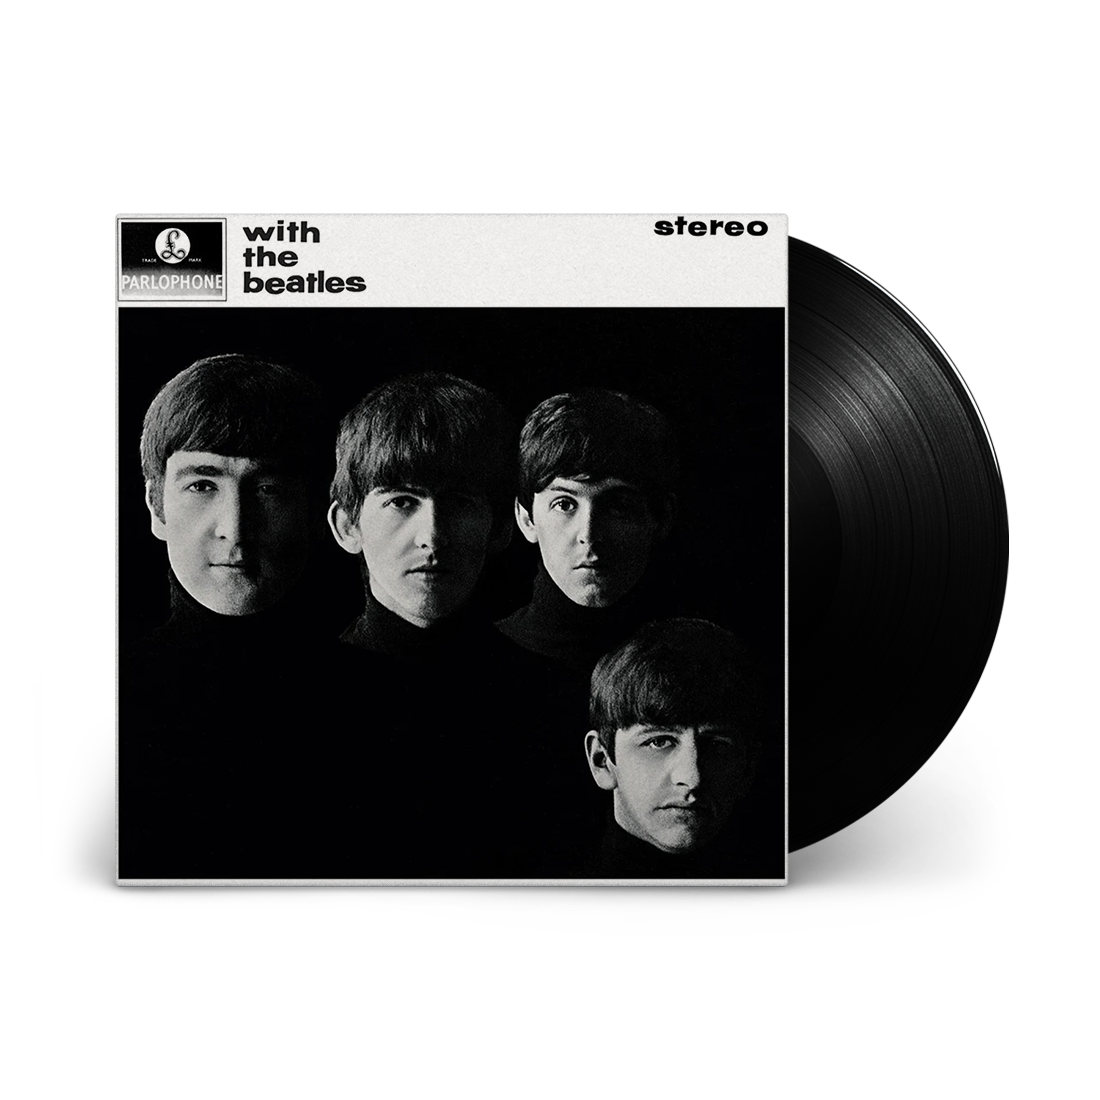 The Beatles - With The Beatles (Stereo 180 Gram Vinyl)